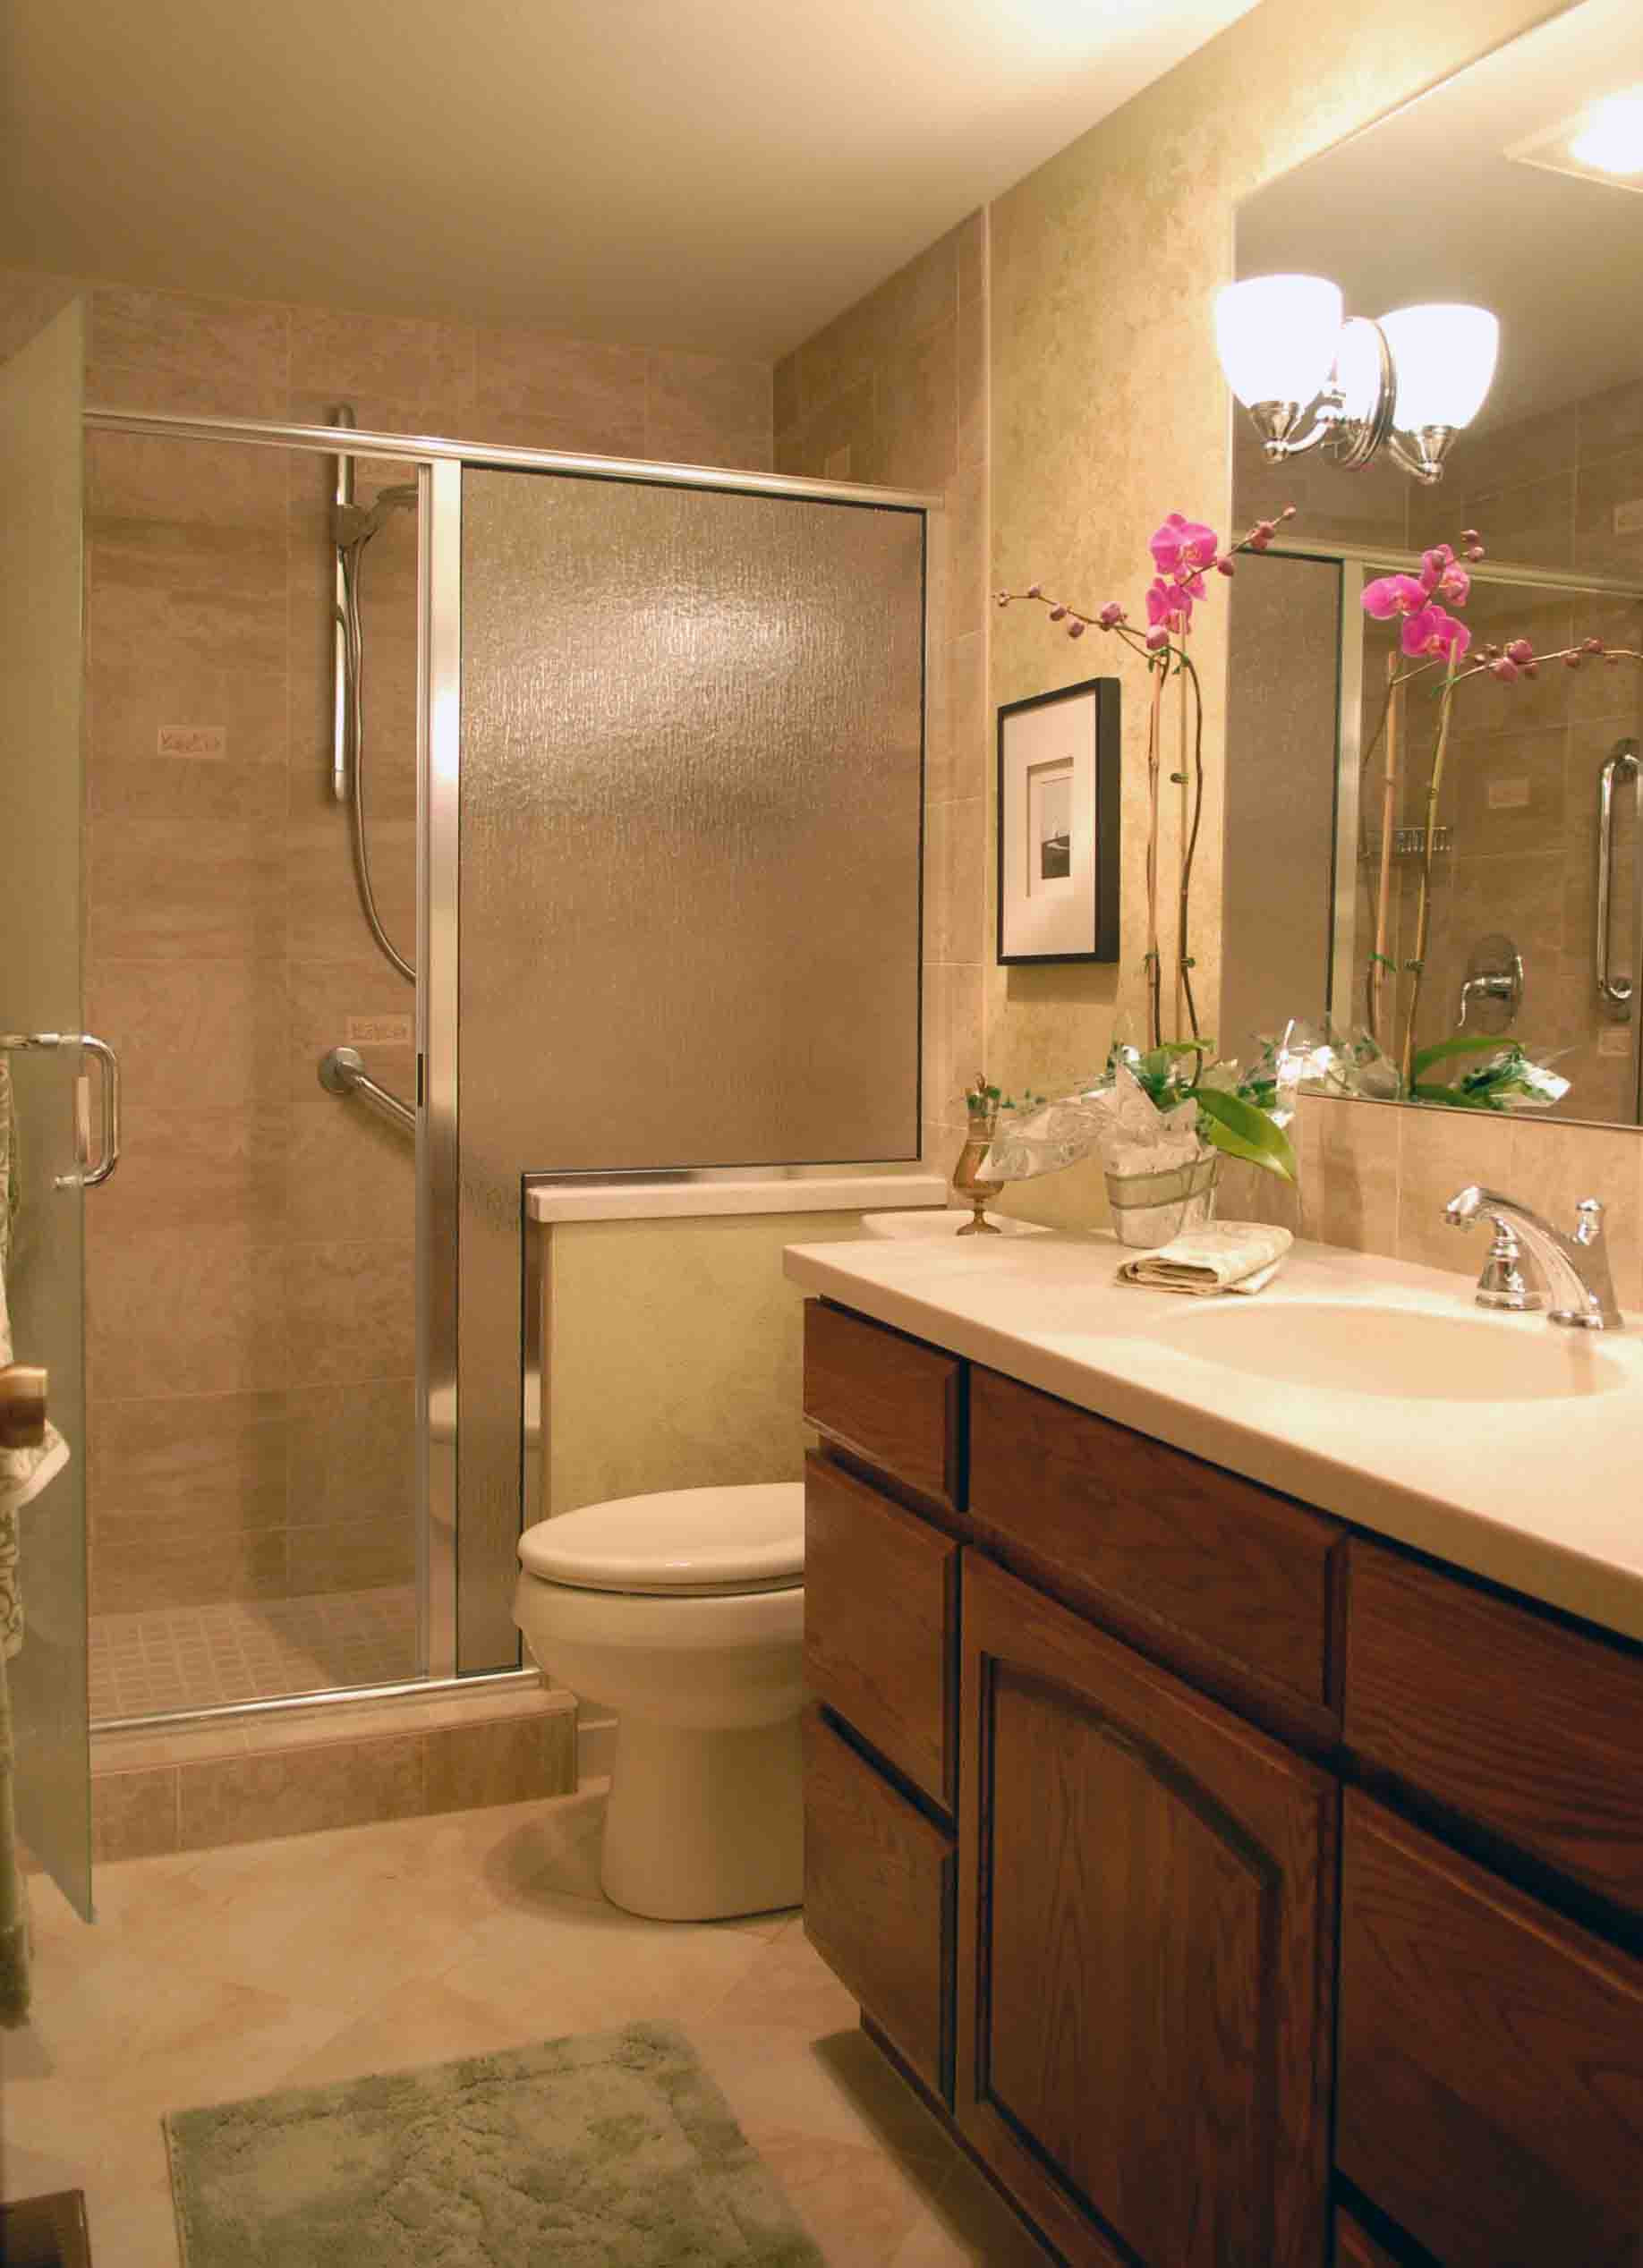 Images Of Bathroom Decor
 intercontinent Gorgeous Bathroom Decor to make your